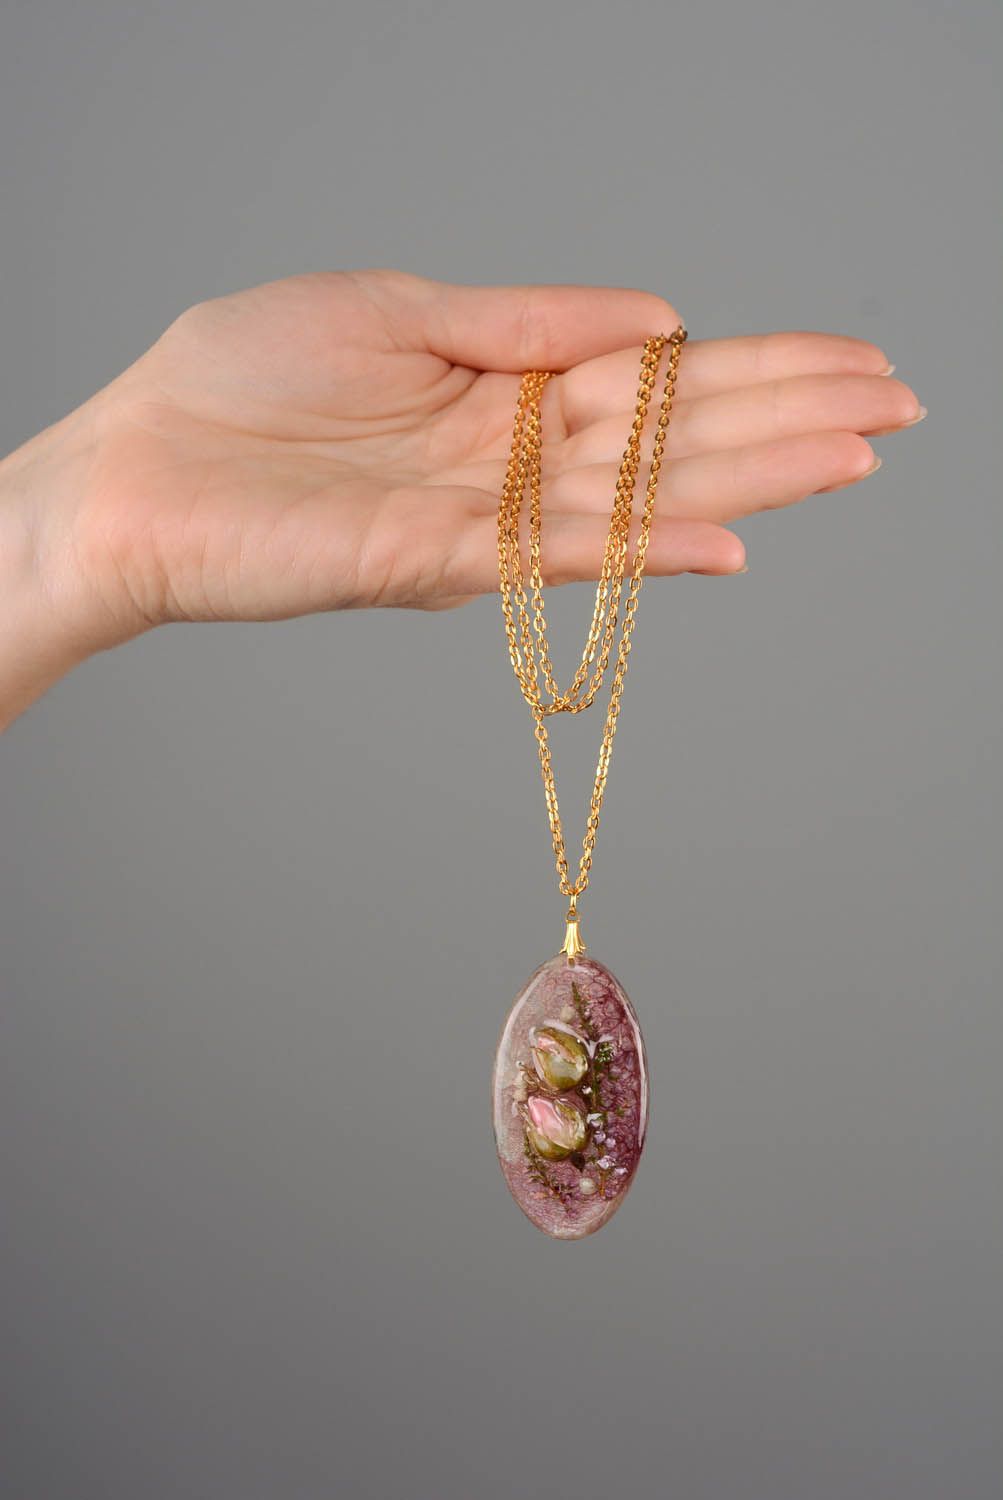 Oval pendant with chain Heather photo 2